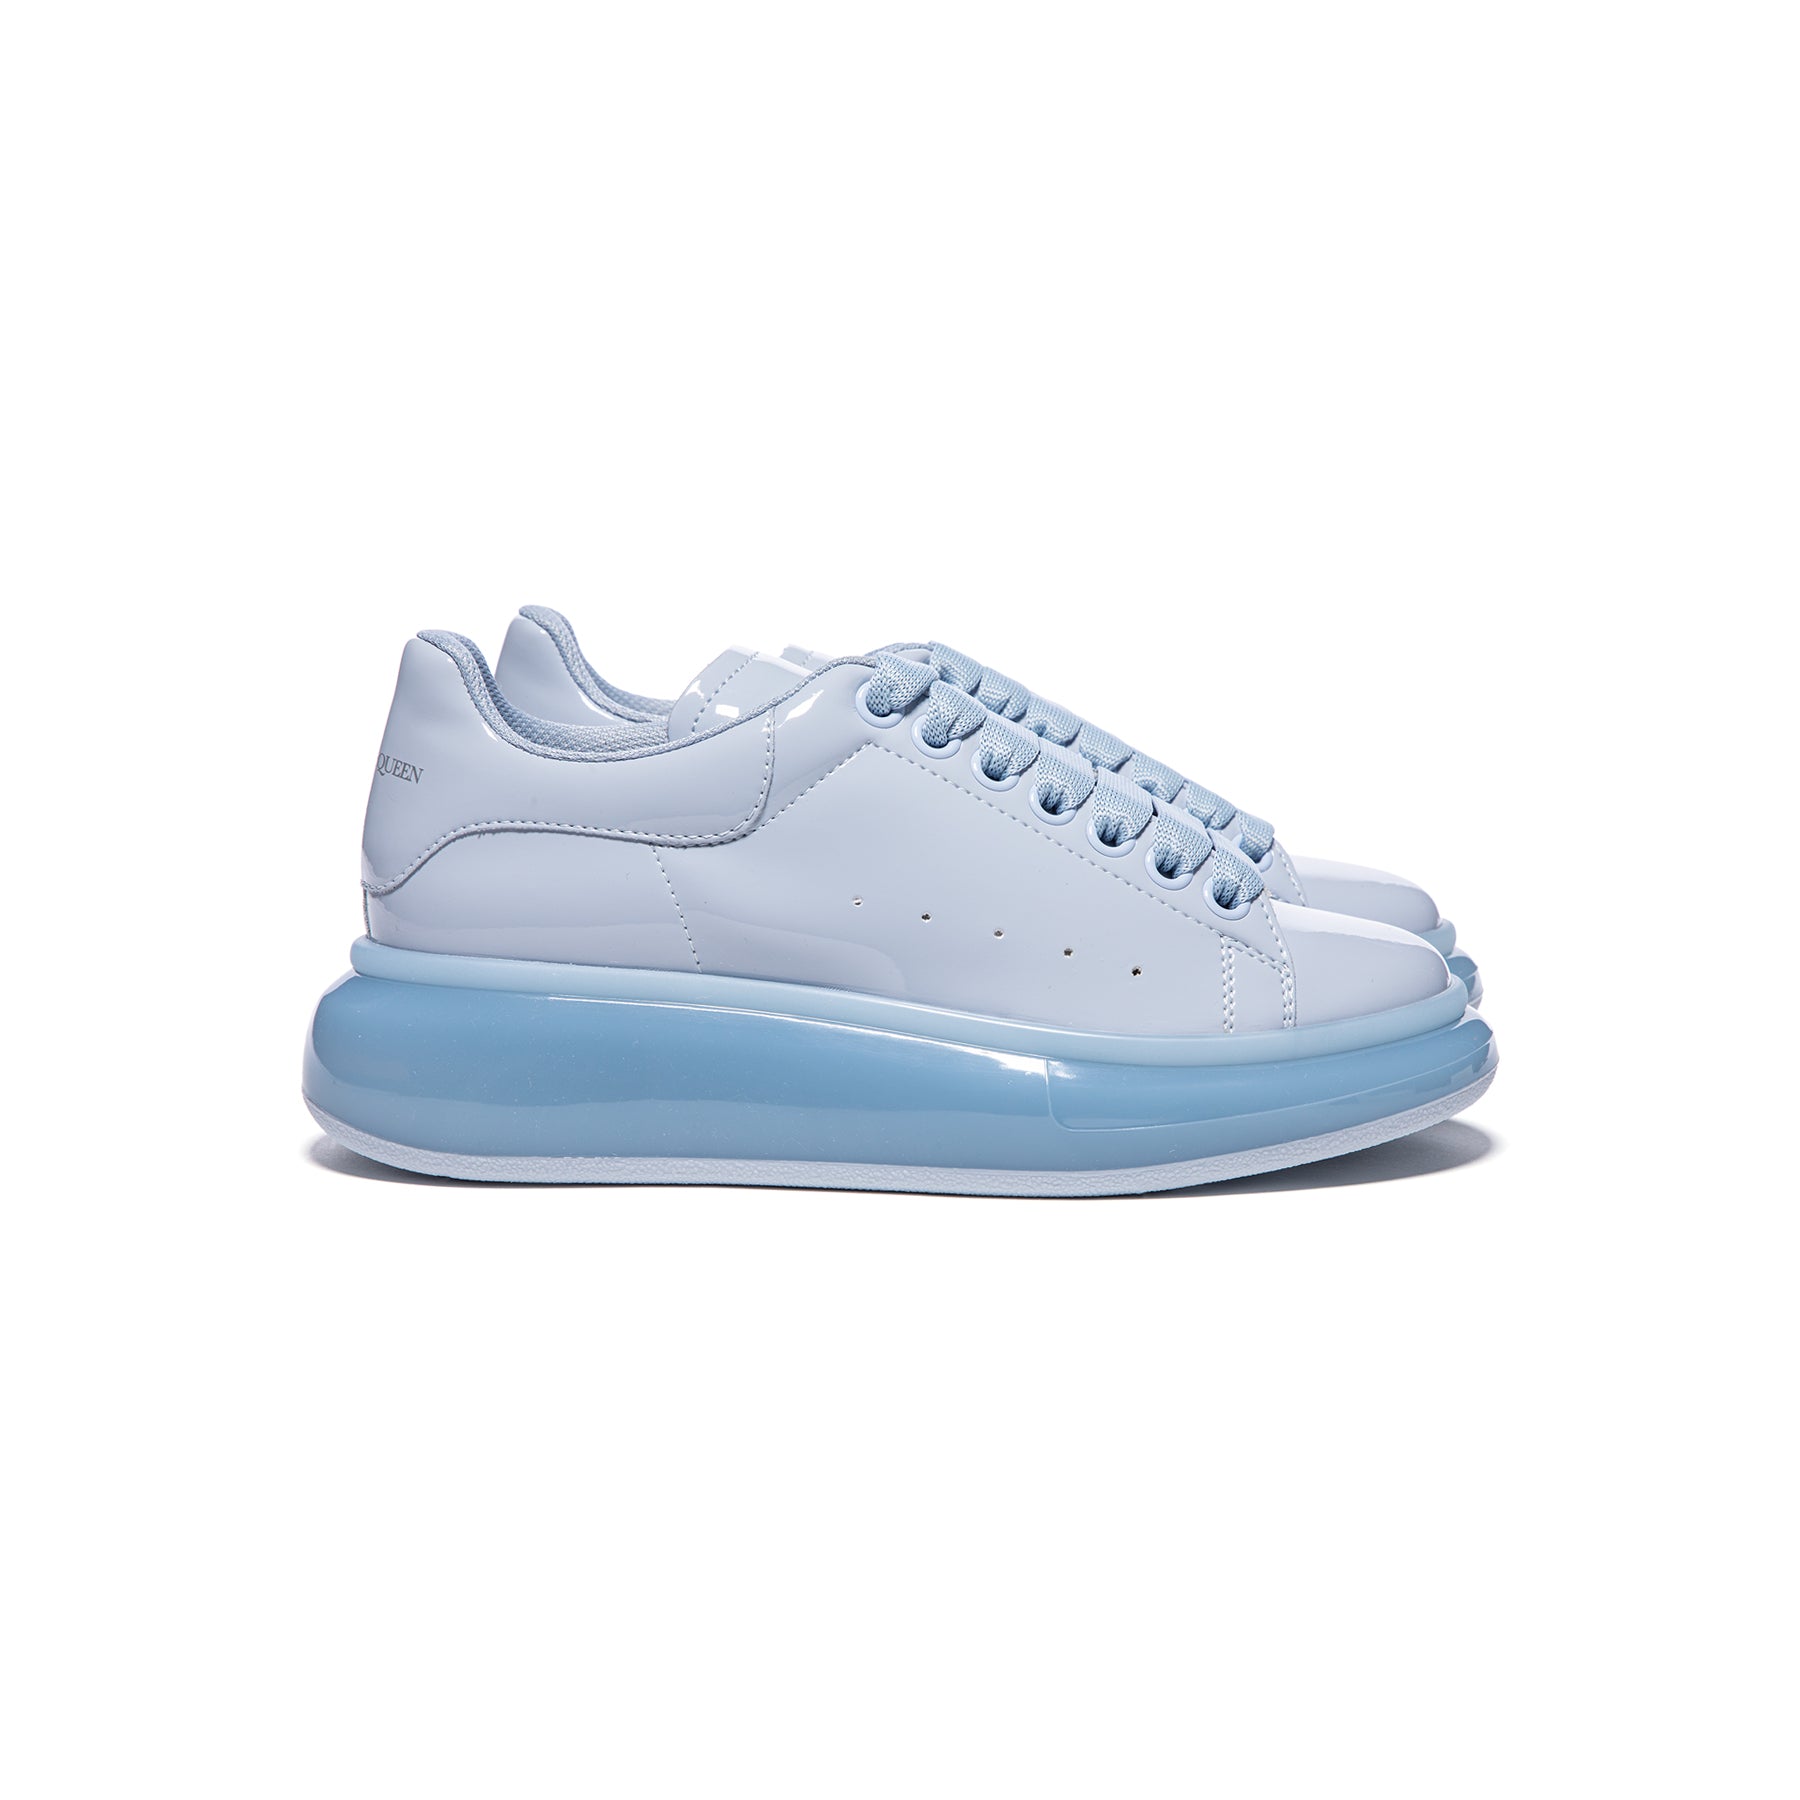 Alexander McQueen Oversized White And Blue Sneakers New | eBay